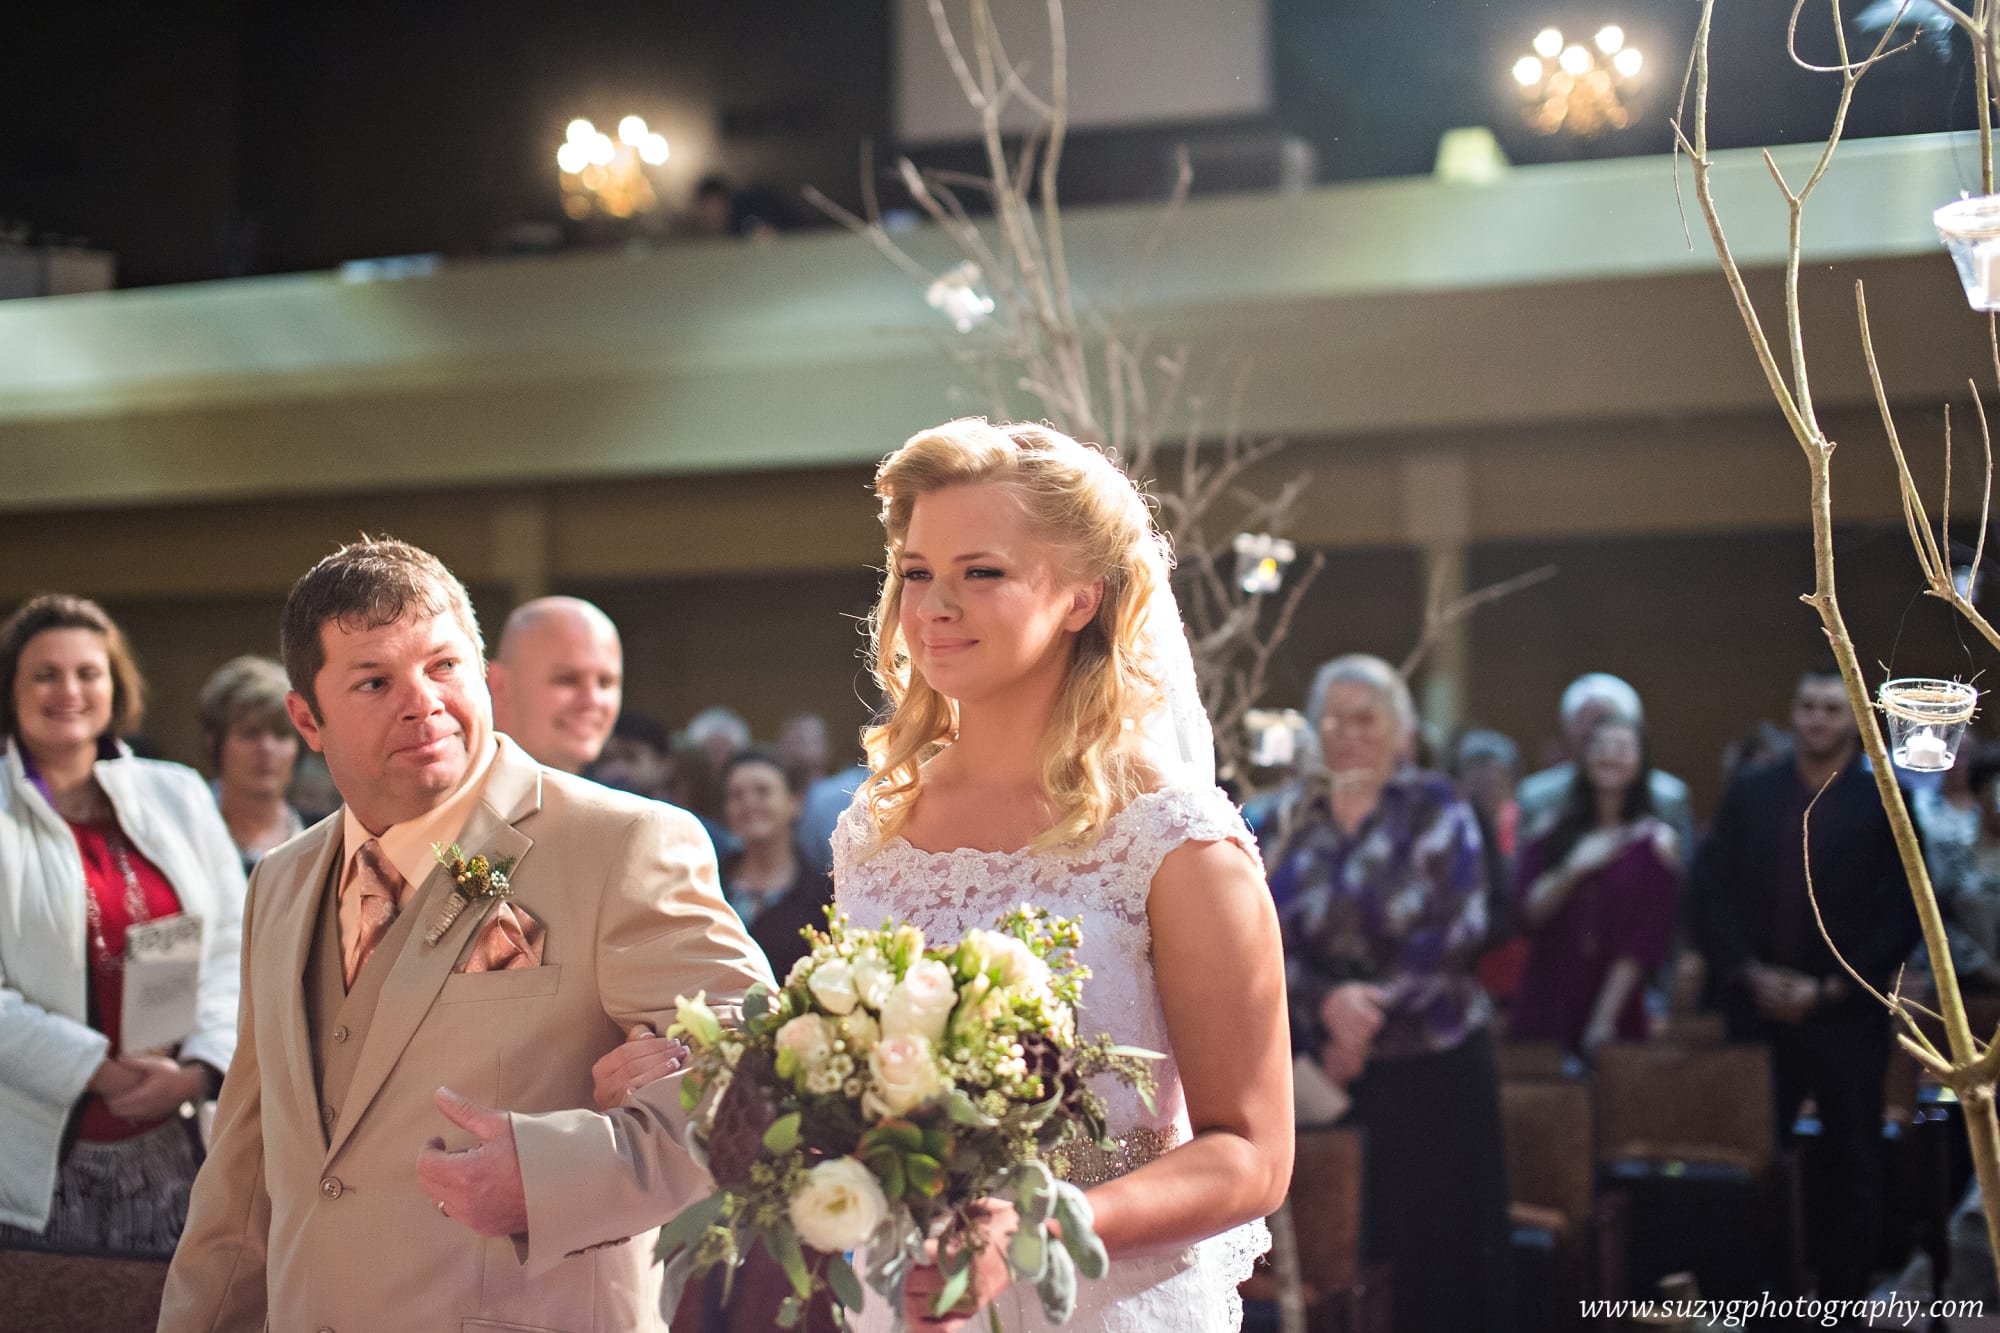 vows by victoria-lake charles-wedding-photography-suzy g-photography-suzygphotography_0039